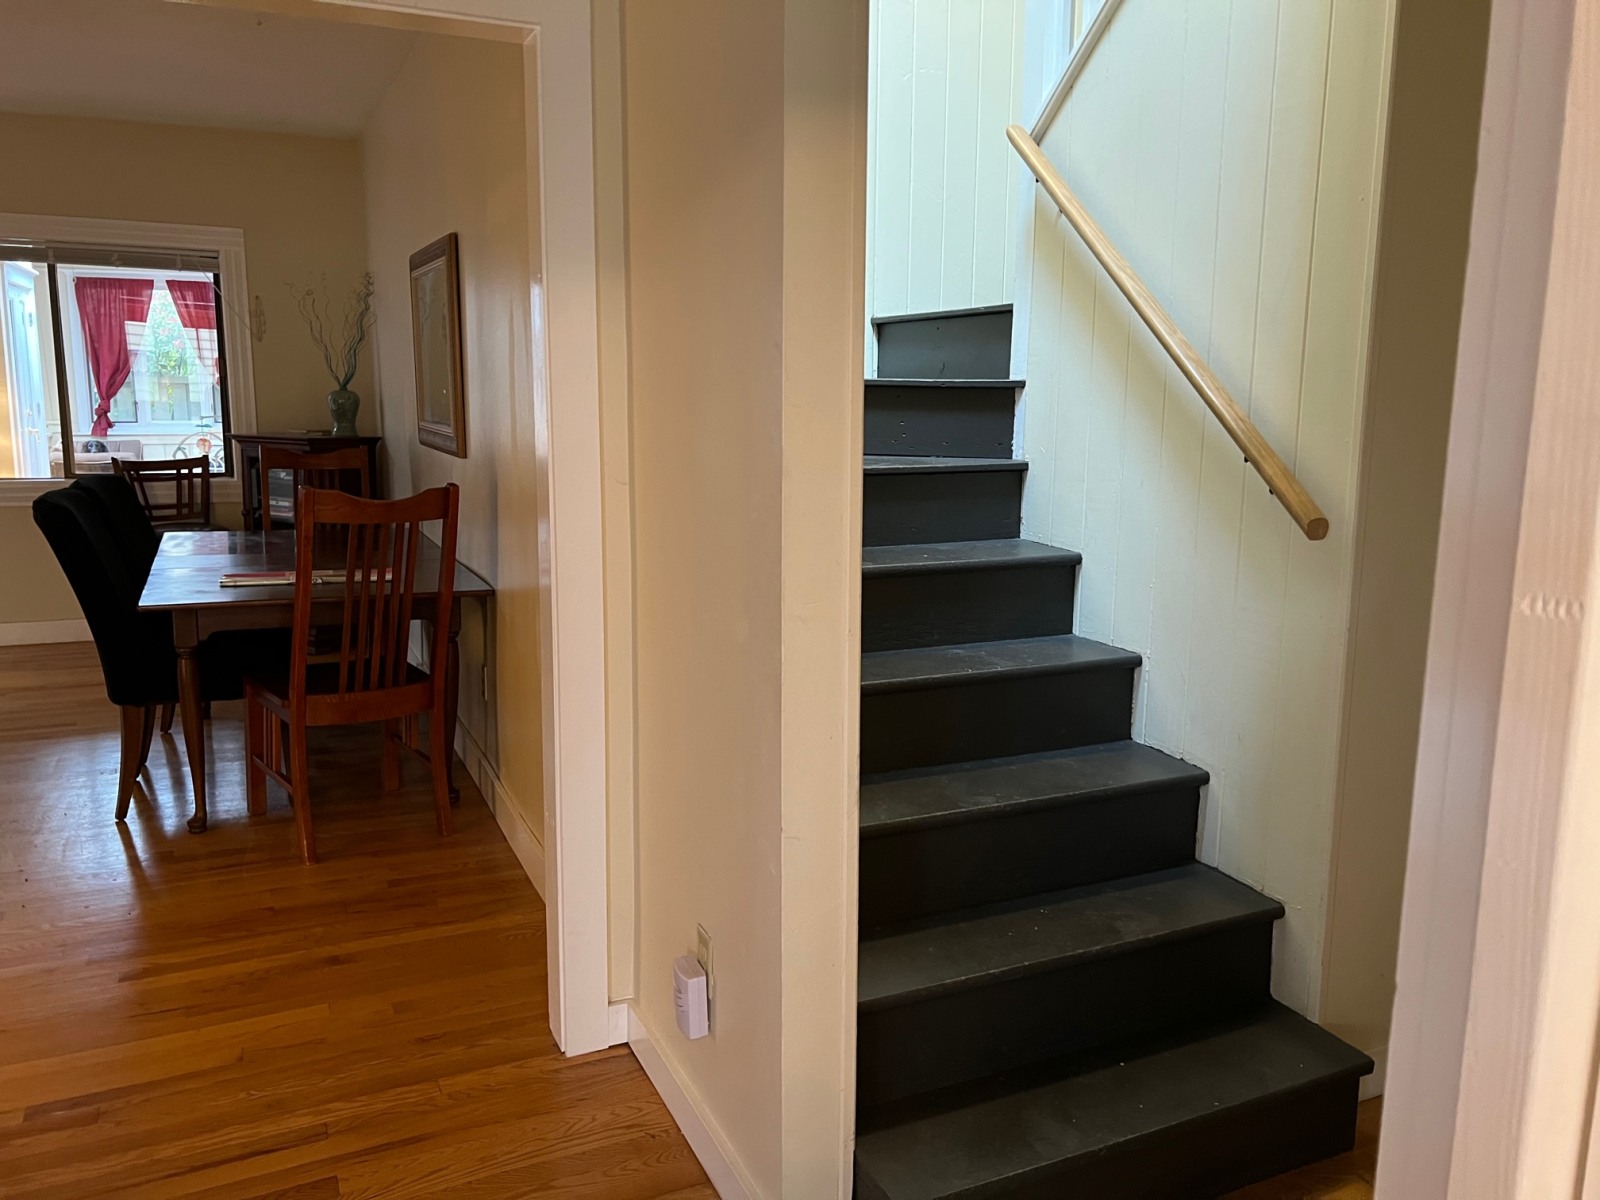 The-Annex-Stairs-to-upper-level